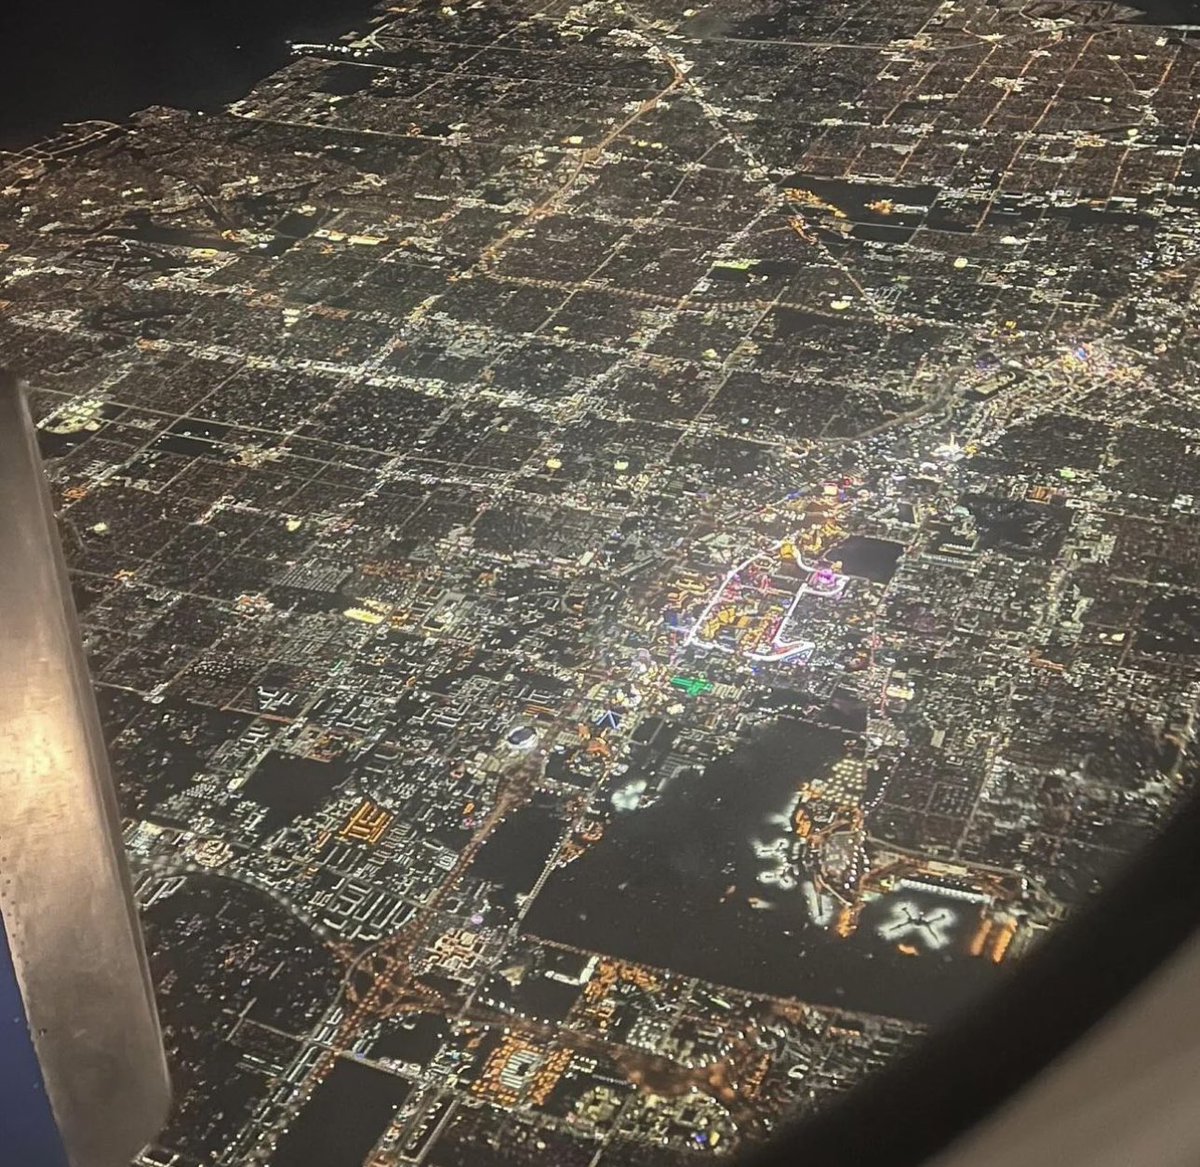 What the F1 Vegas track looks like from 20,000 feet in the sky. 👀 📸: @JoeyF1_